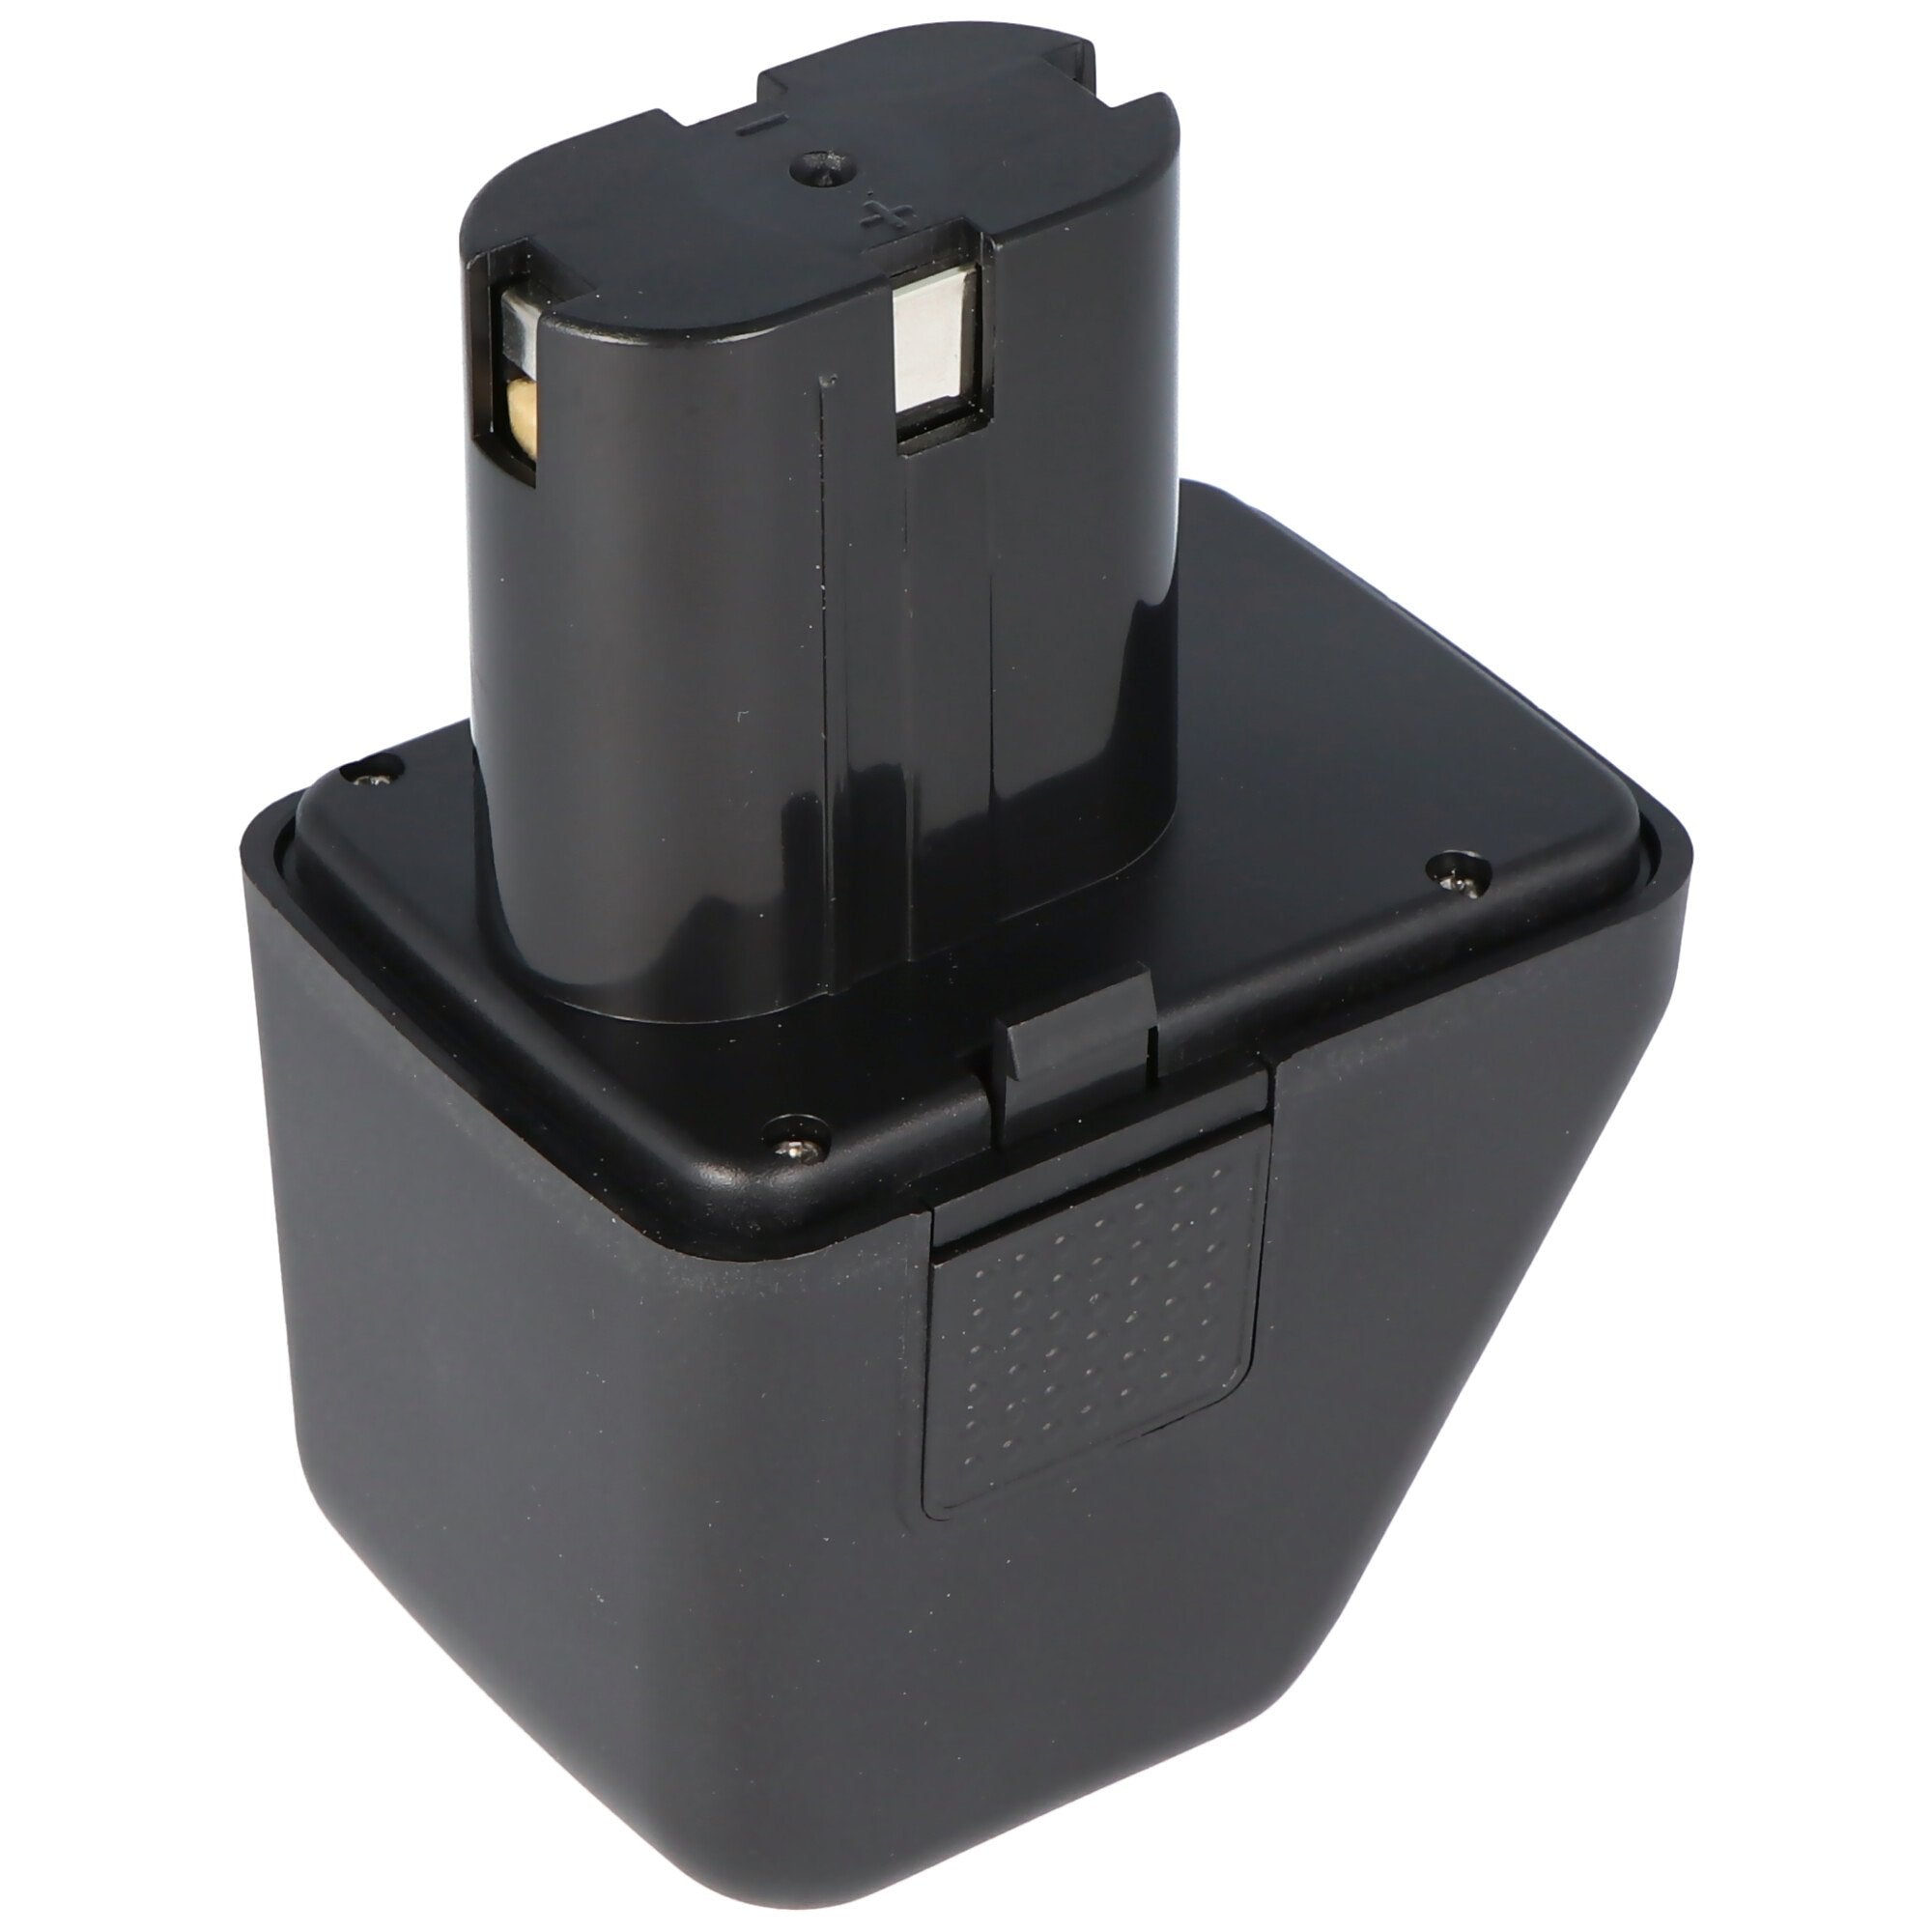 Battery suitable for Gesipa tools 12V 1.4Ah, Würth G12, 070291510, ANG 12, 0702915, 0702915 10, 0702